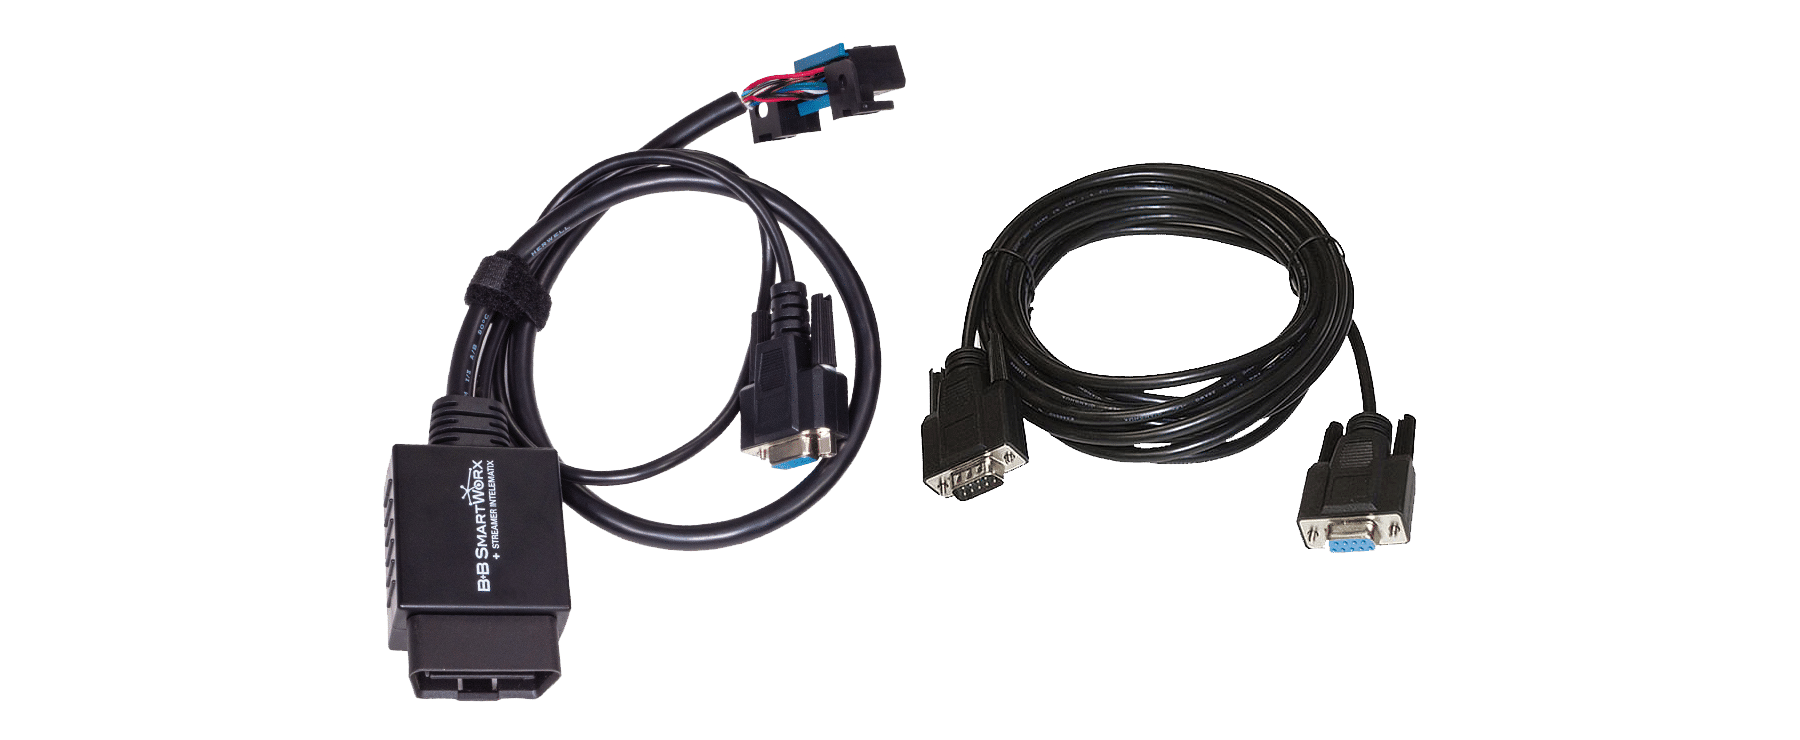 Cradlepoint OBD-II Cable M/F with DB9-DB9